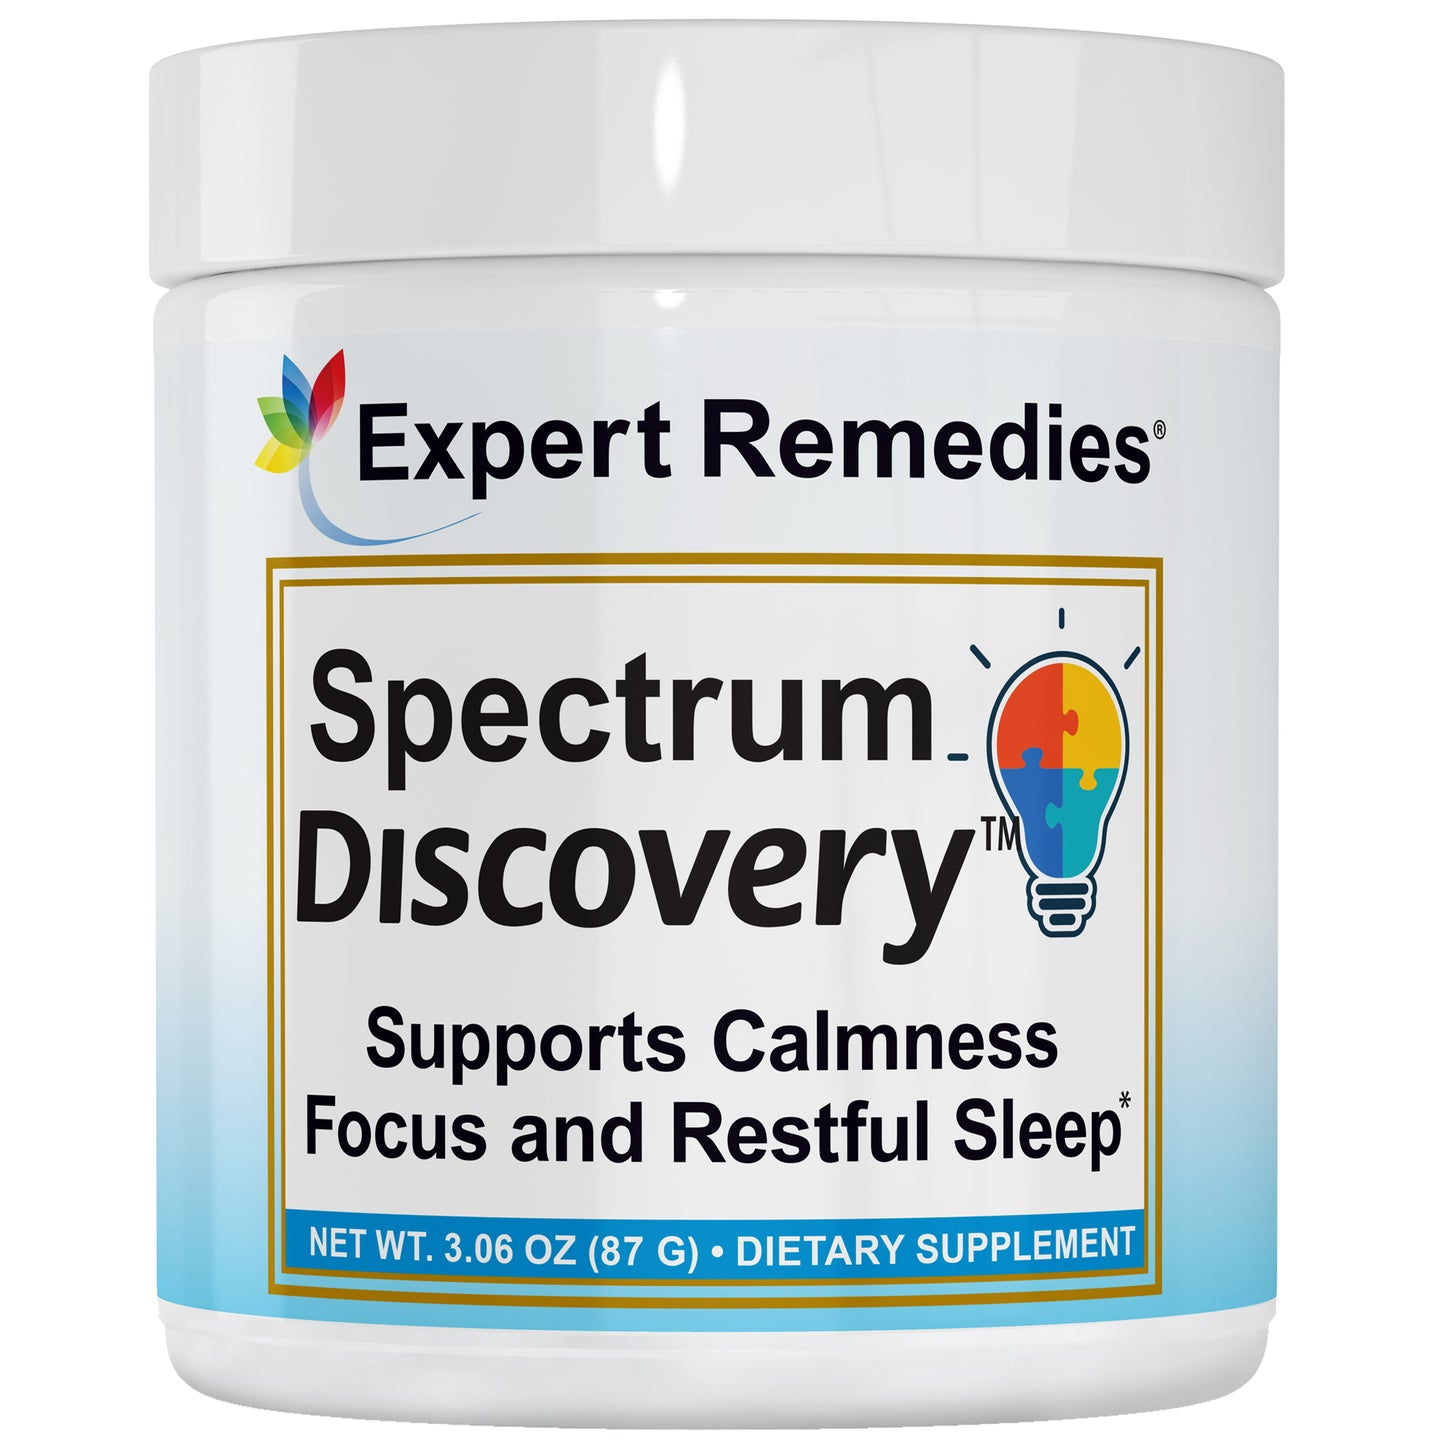 Get 1 Bottle of Spectrum Discovery